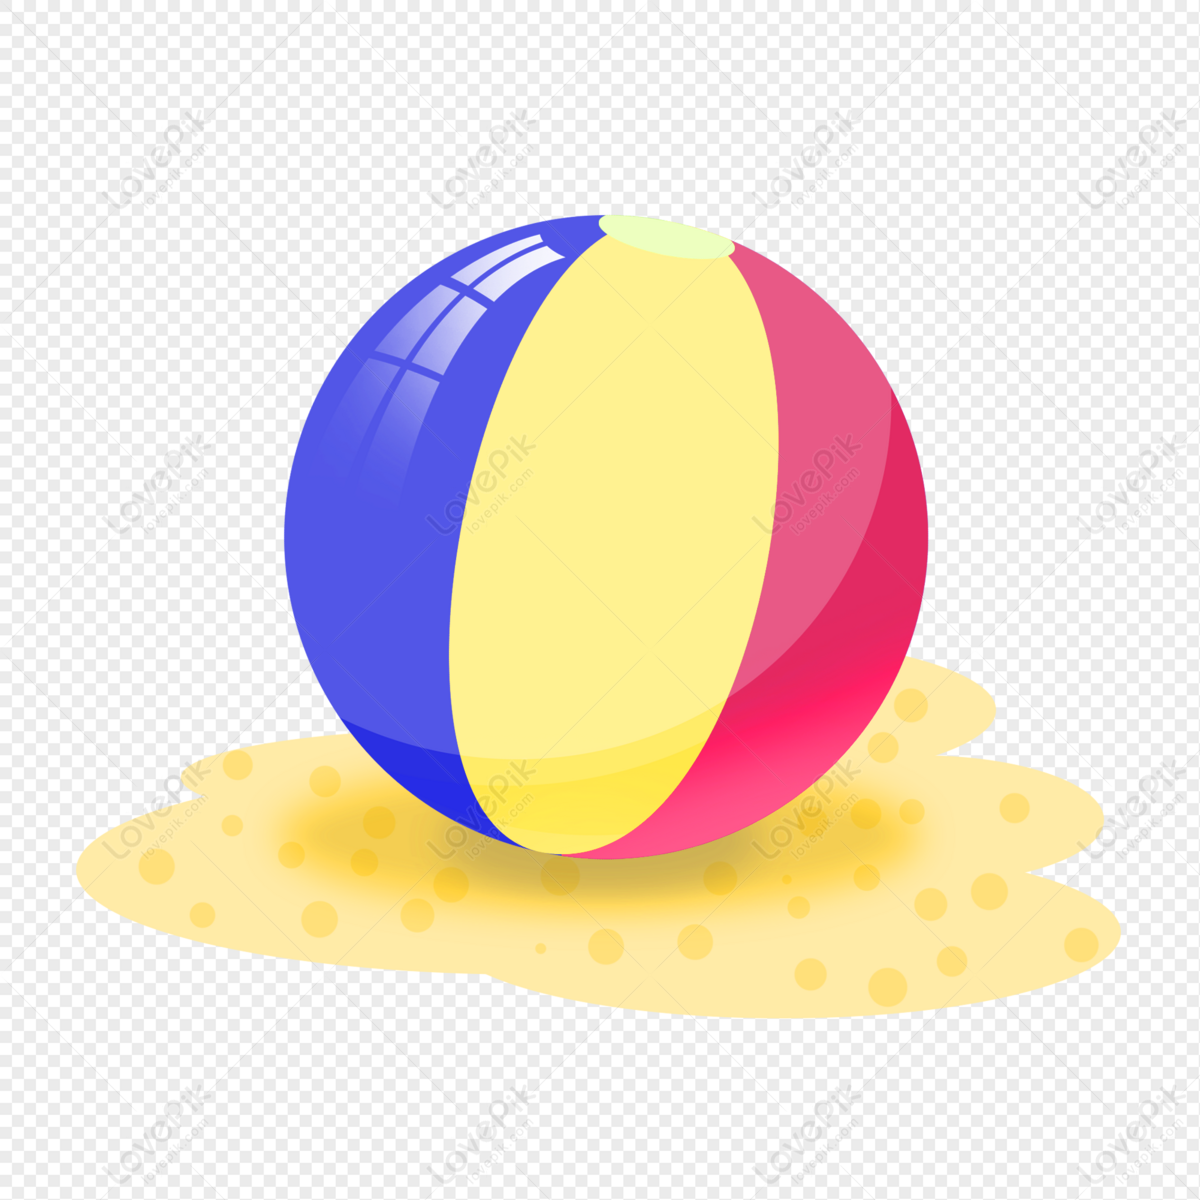 Beach Ball PNG Transparent Image And Clipart Image For Free Download -  Lovepik | 401295907